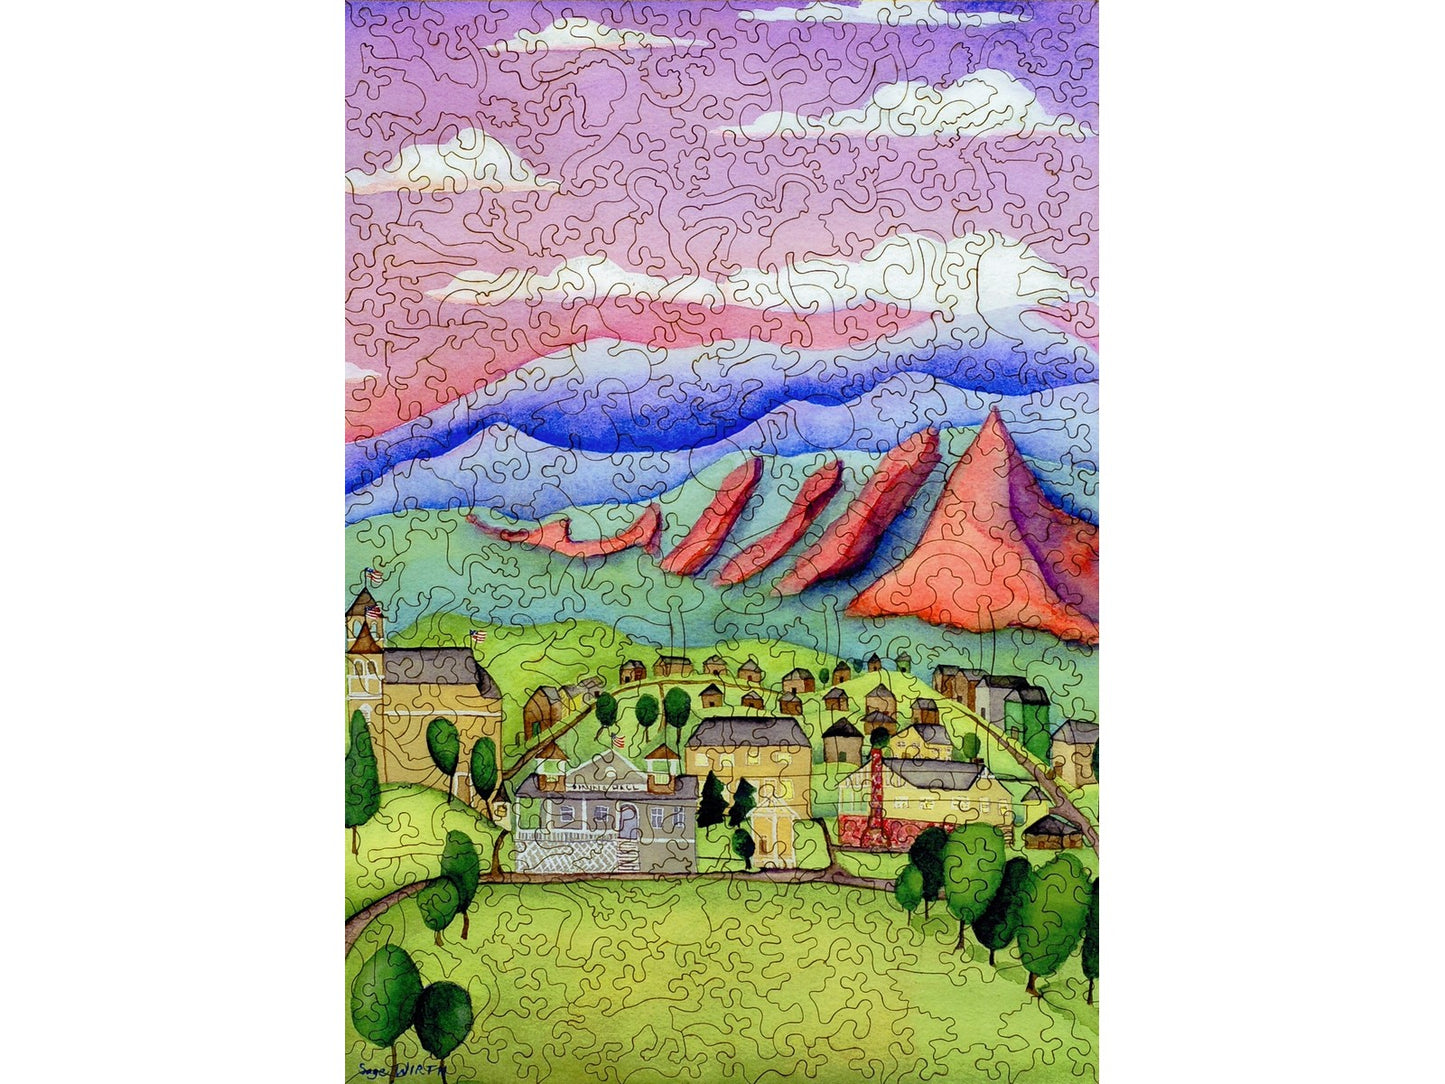 The front of the puzzle, Chautauqua Park, which shows a watercolor landscape of a park with mountains behind it and a pink sky with clouds.